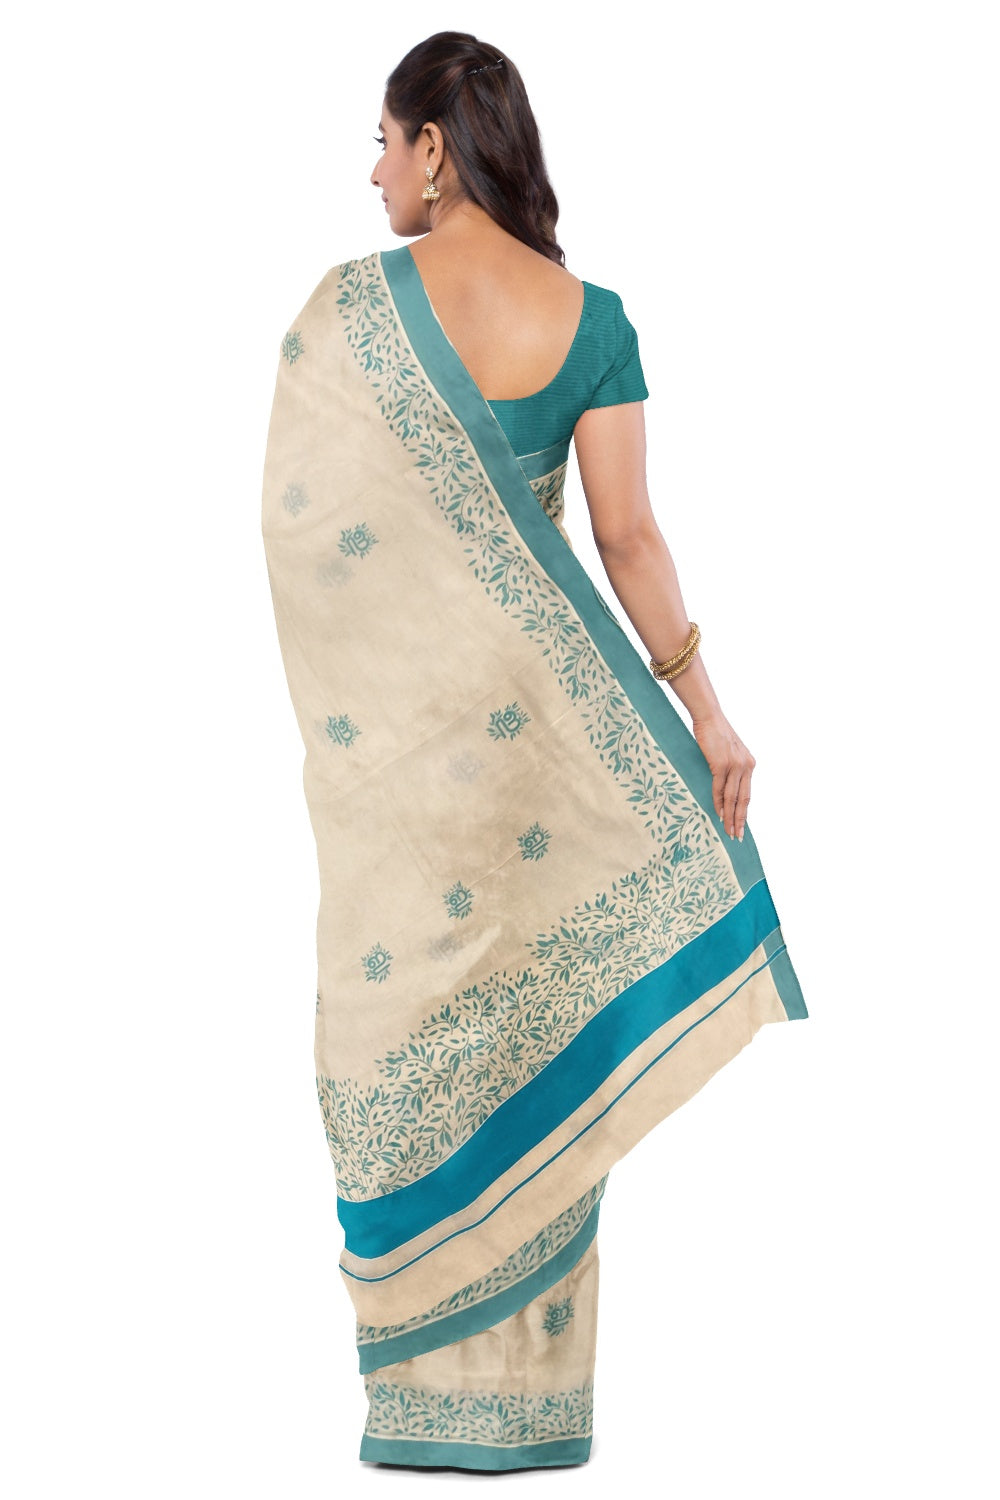 Southloom Turquoise  Border Kerala Saree with Malayalam Themed Prints (by Govt of Kerala)